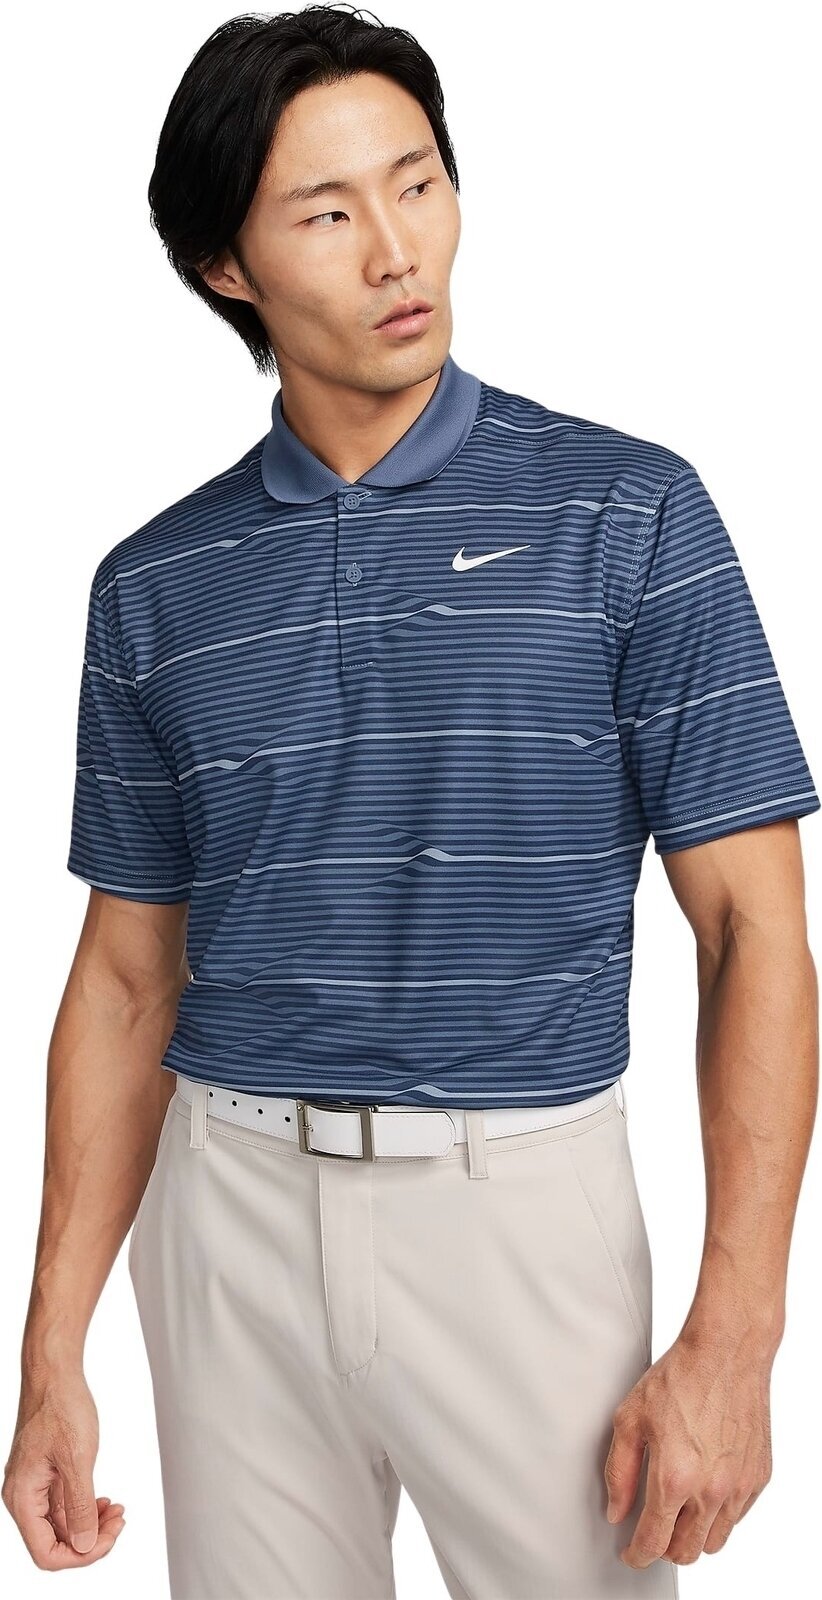 Nike Dri-Fit Victory Ripple Mens Polo Midnight Navy/Diffused Blue/White S